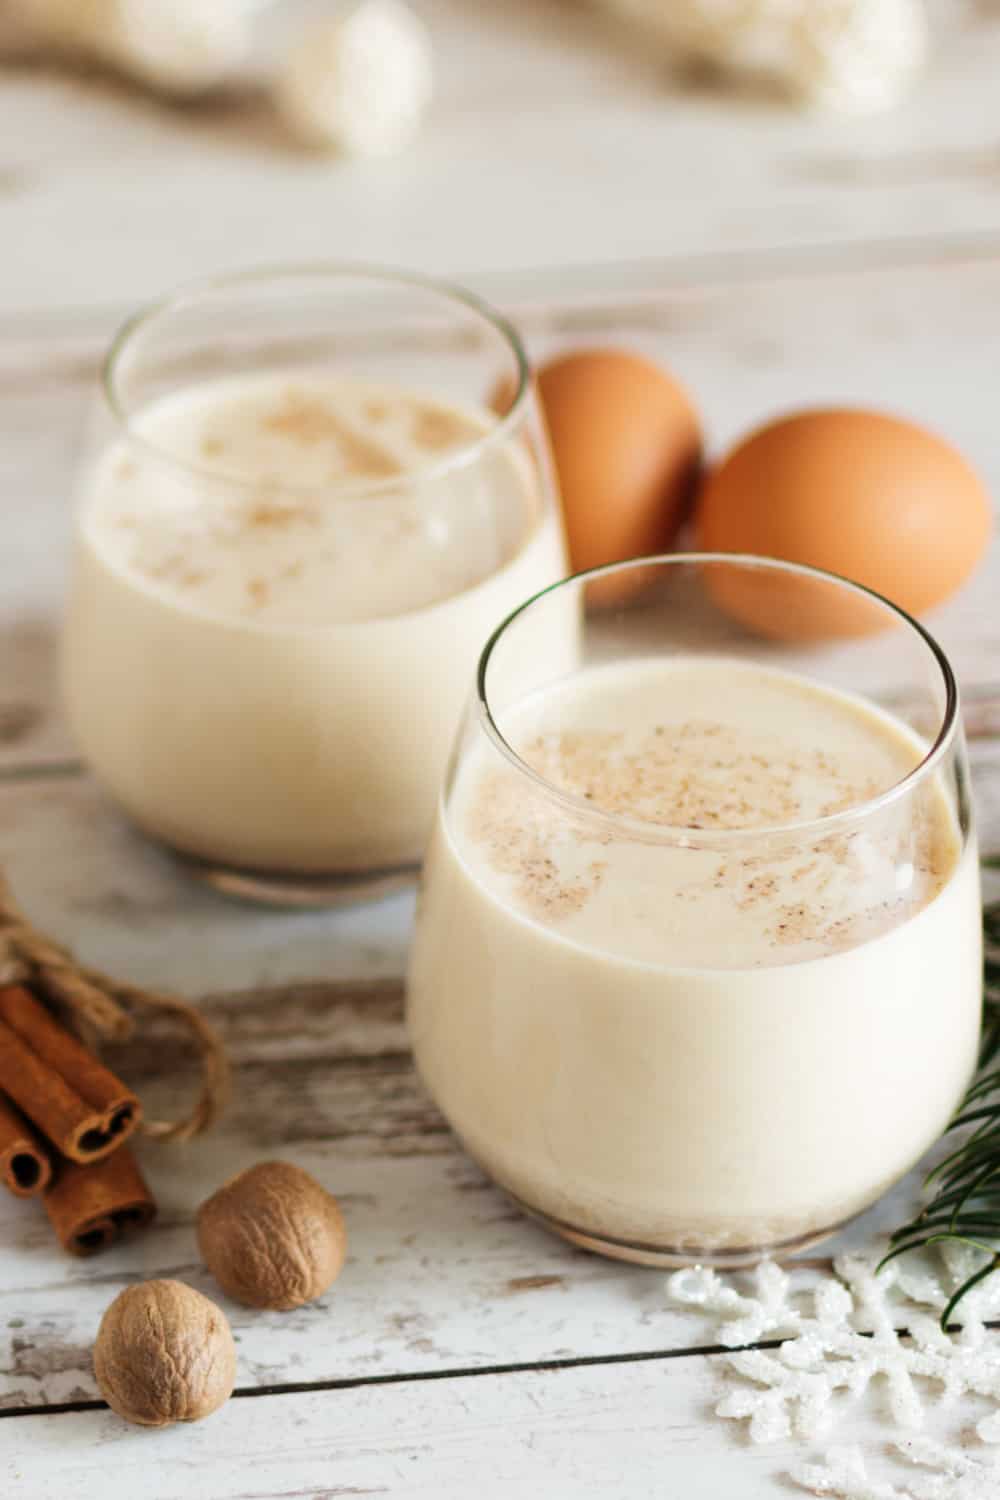 Does Eggnog Go Bad? How Long Does It Last? - Lucky Belly